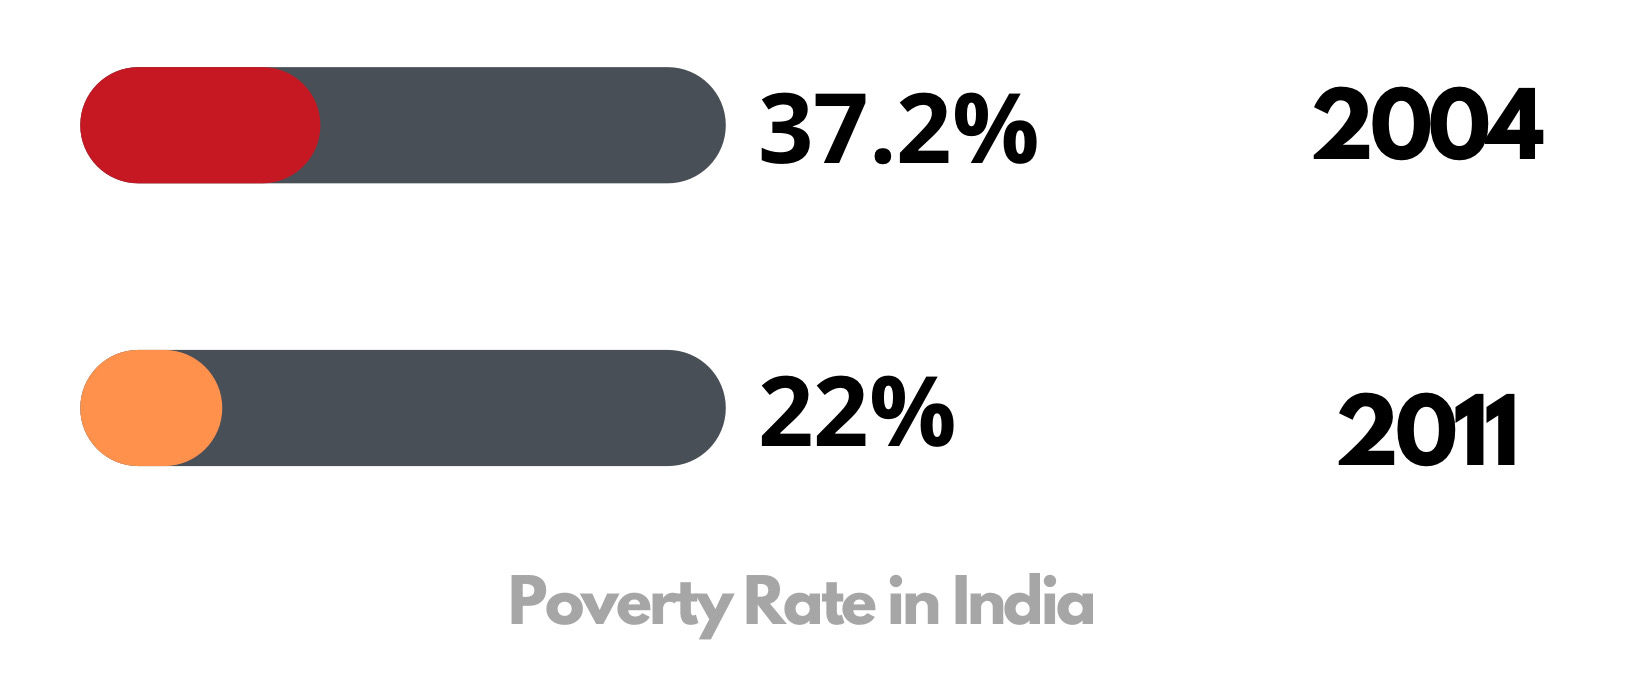 Poverty Rate in India